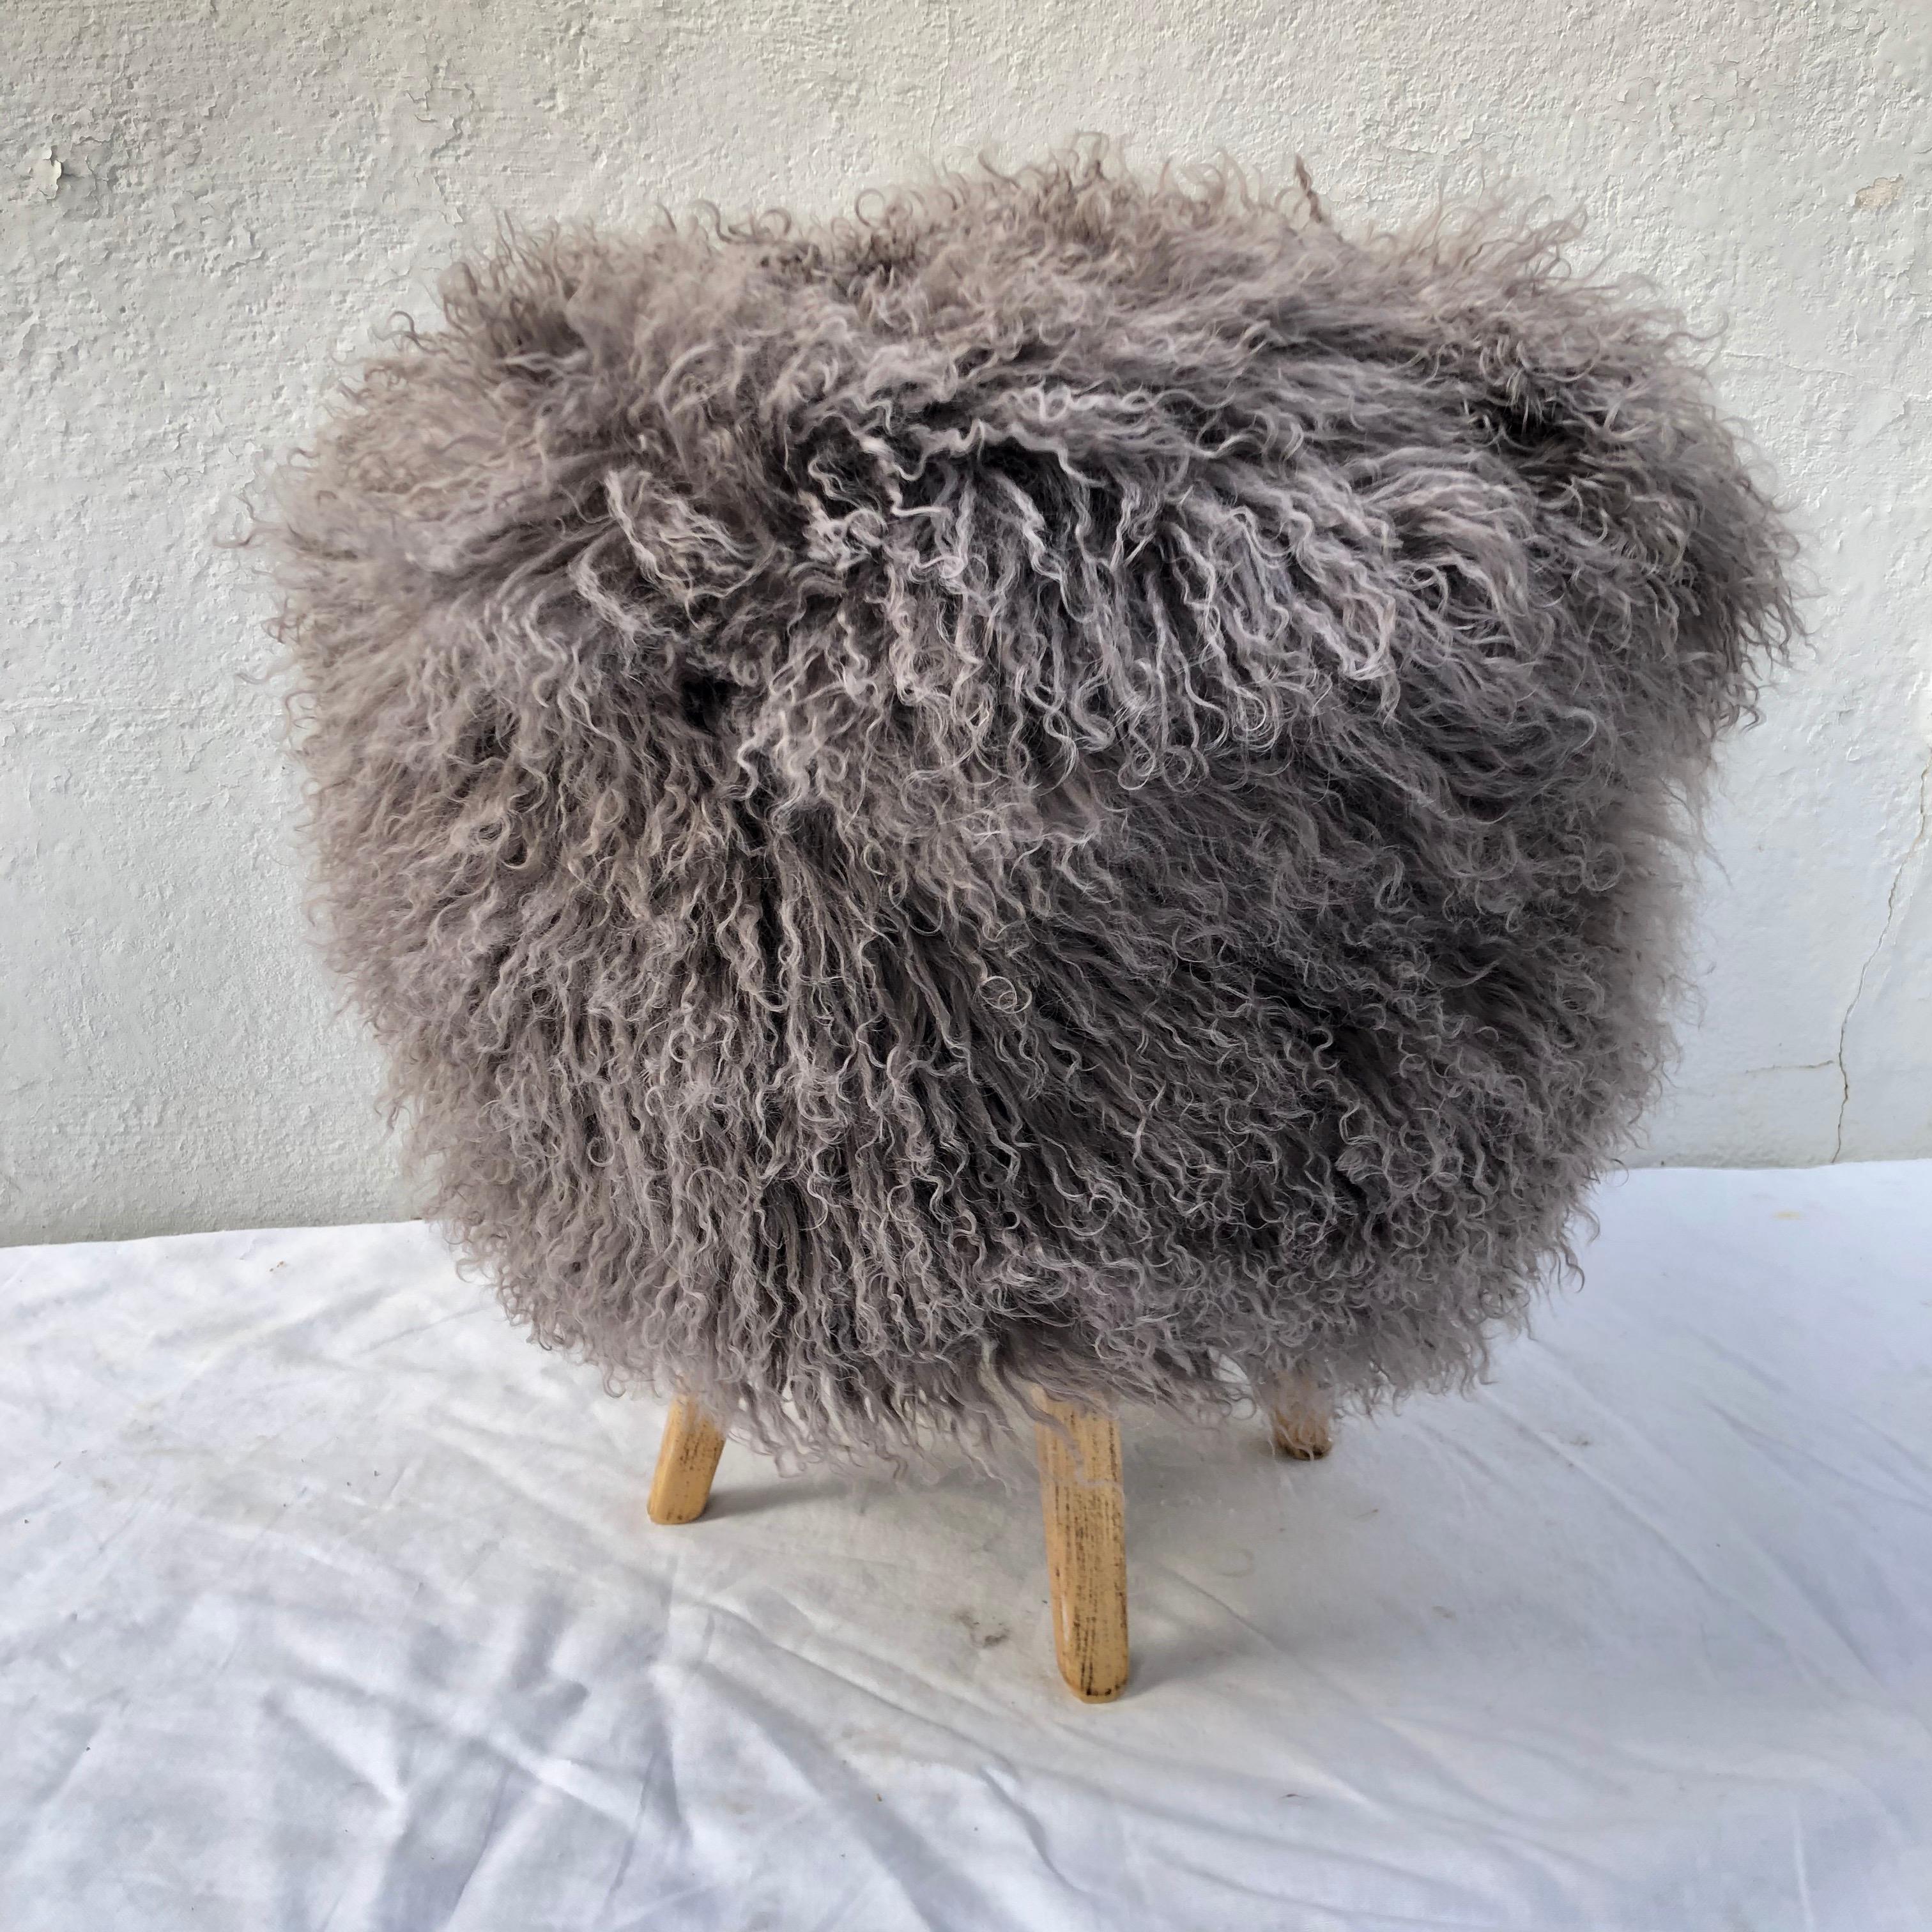 Newly upholstered stool/ ottoman in long hair warm gray Tibetan lamb with four wood legs...

It measures 19